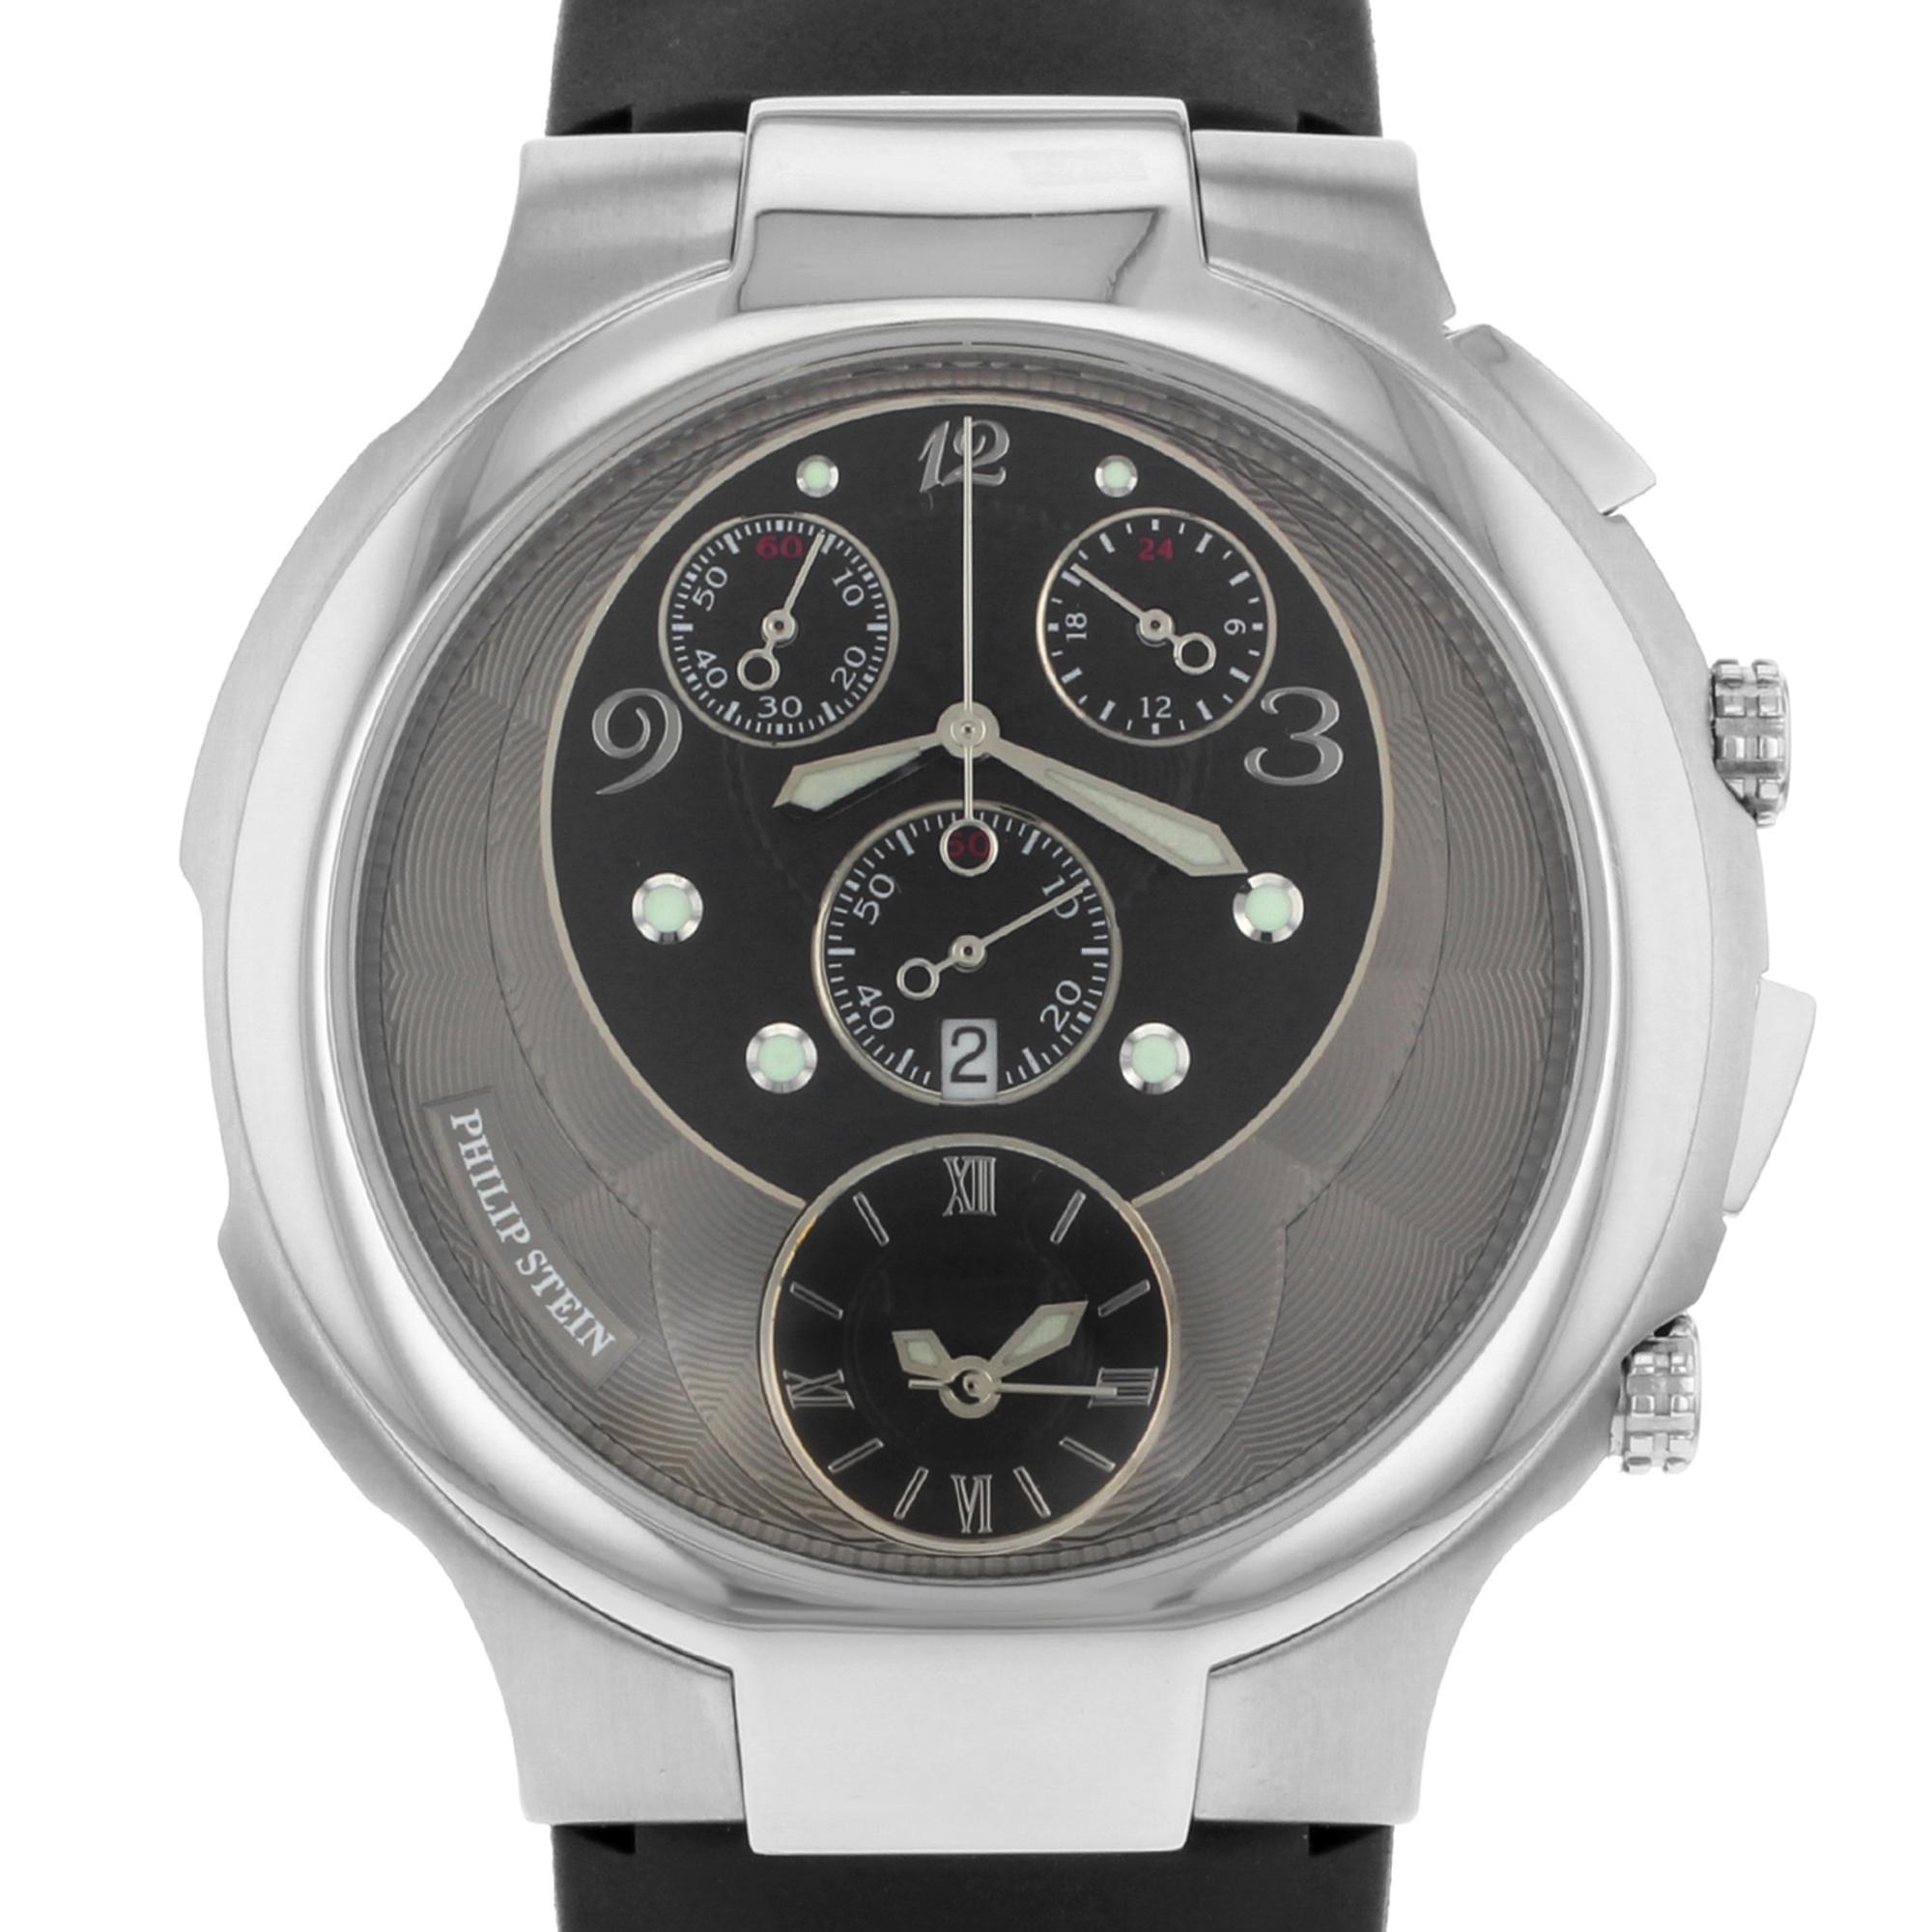 This pre-owned Philip Stein Chrono  9-CRB3-CB is a beautiful men's timepiece that is powered by a quartz movement which is cased in a stainless steel case. It has a round shape face, chronograph, date, dual time, small seconds subdial dial and has